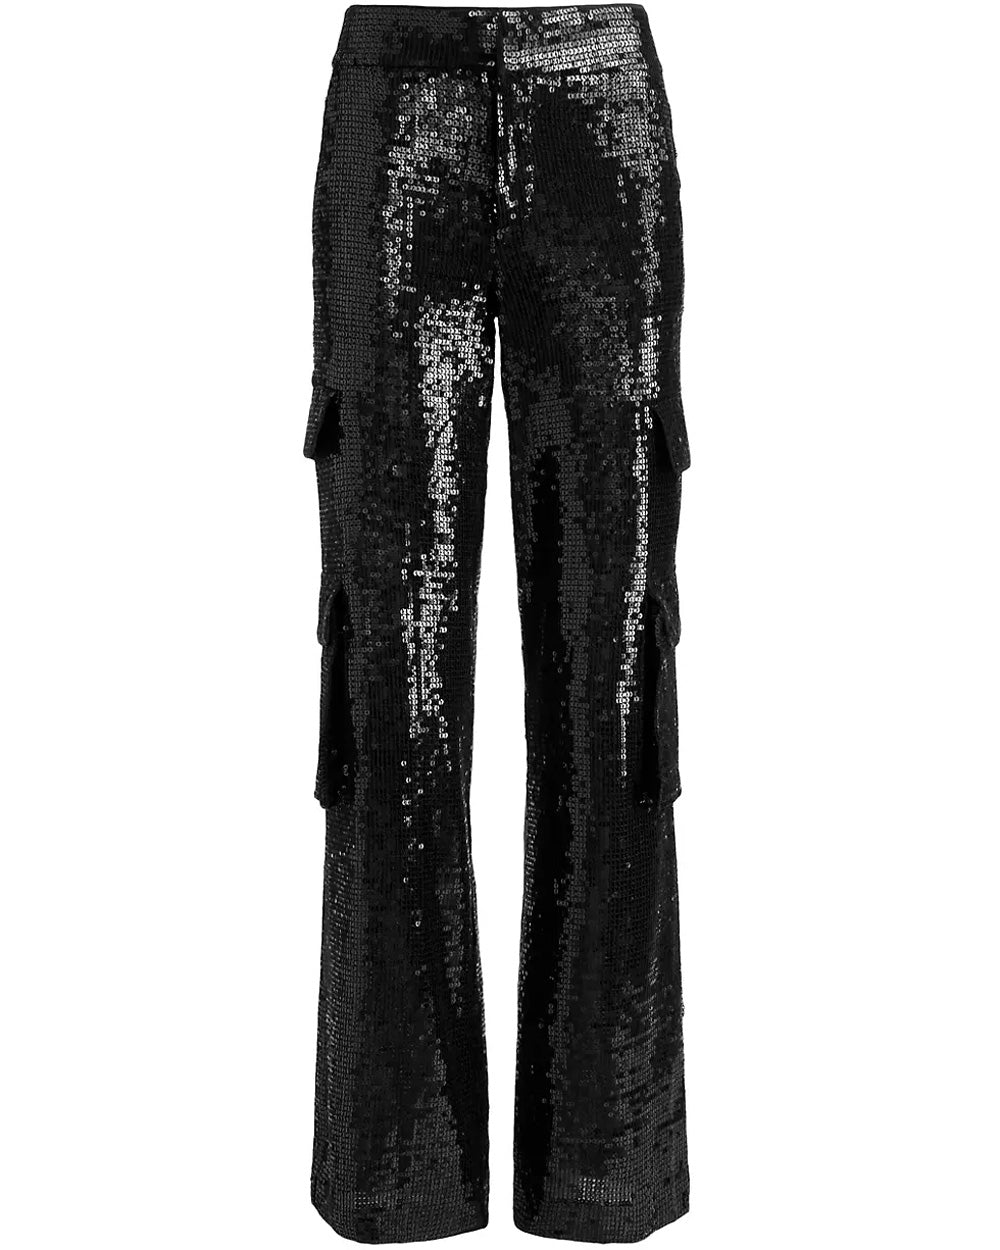 Black Sequin Hayes Cargo Pant